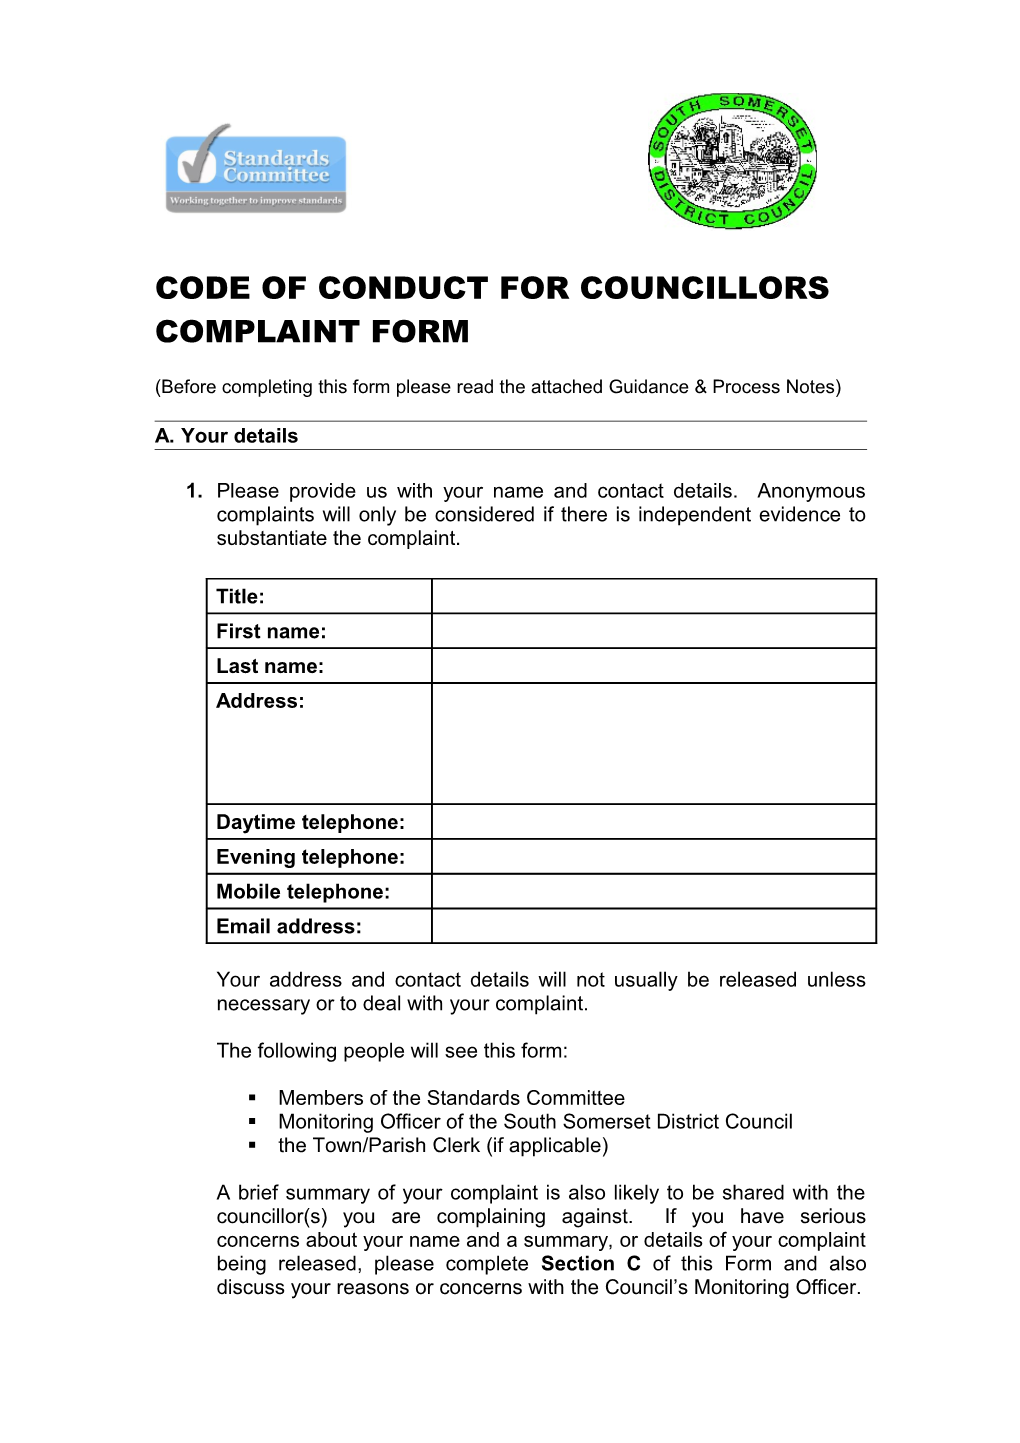 Code of Conduct for Councillors